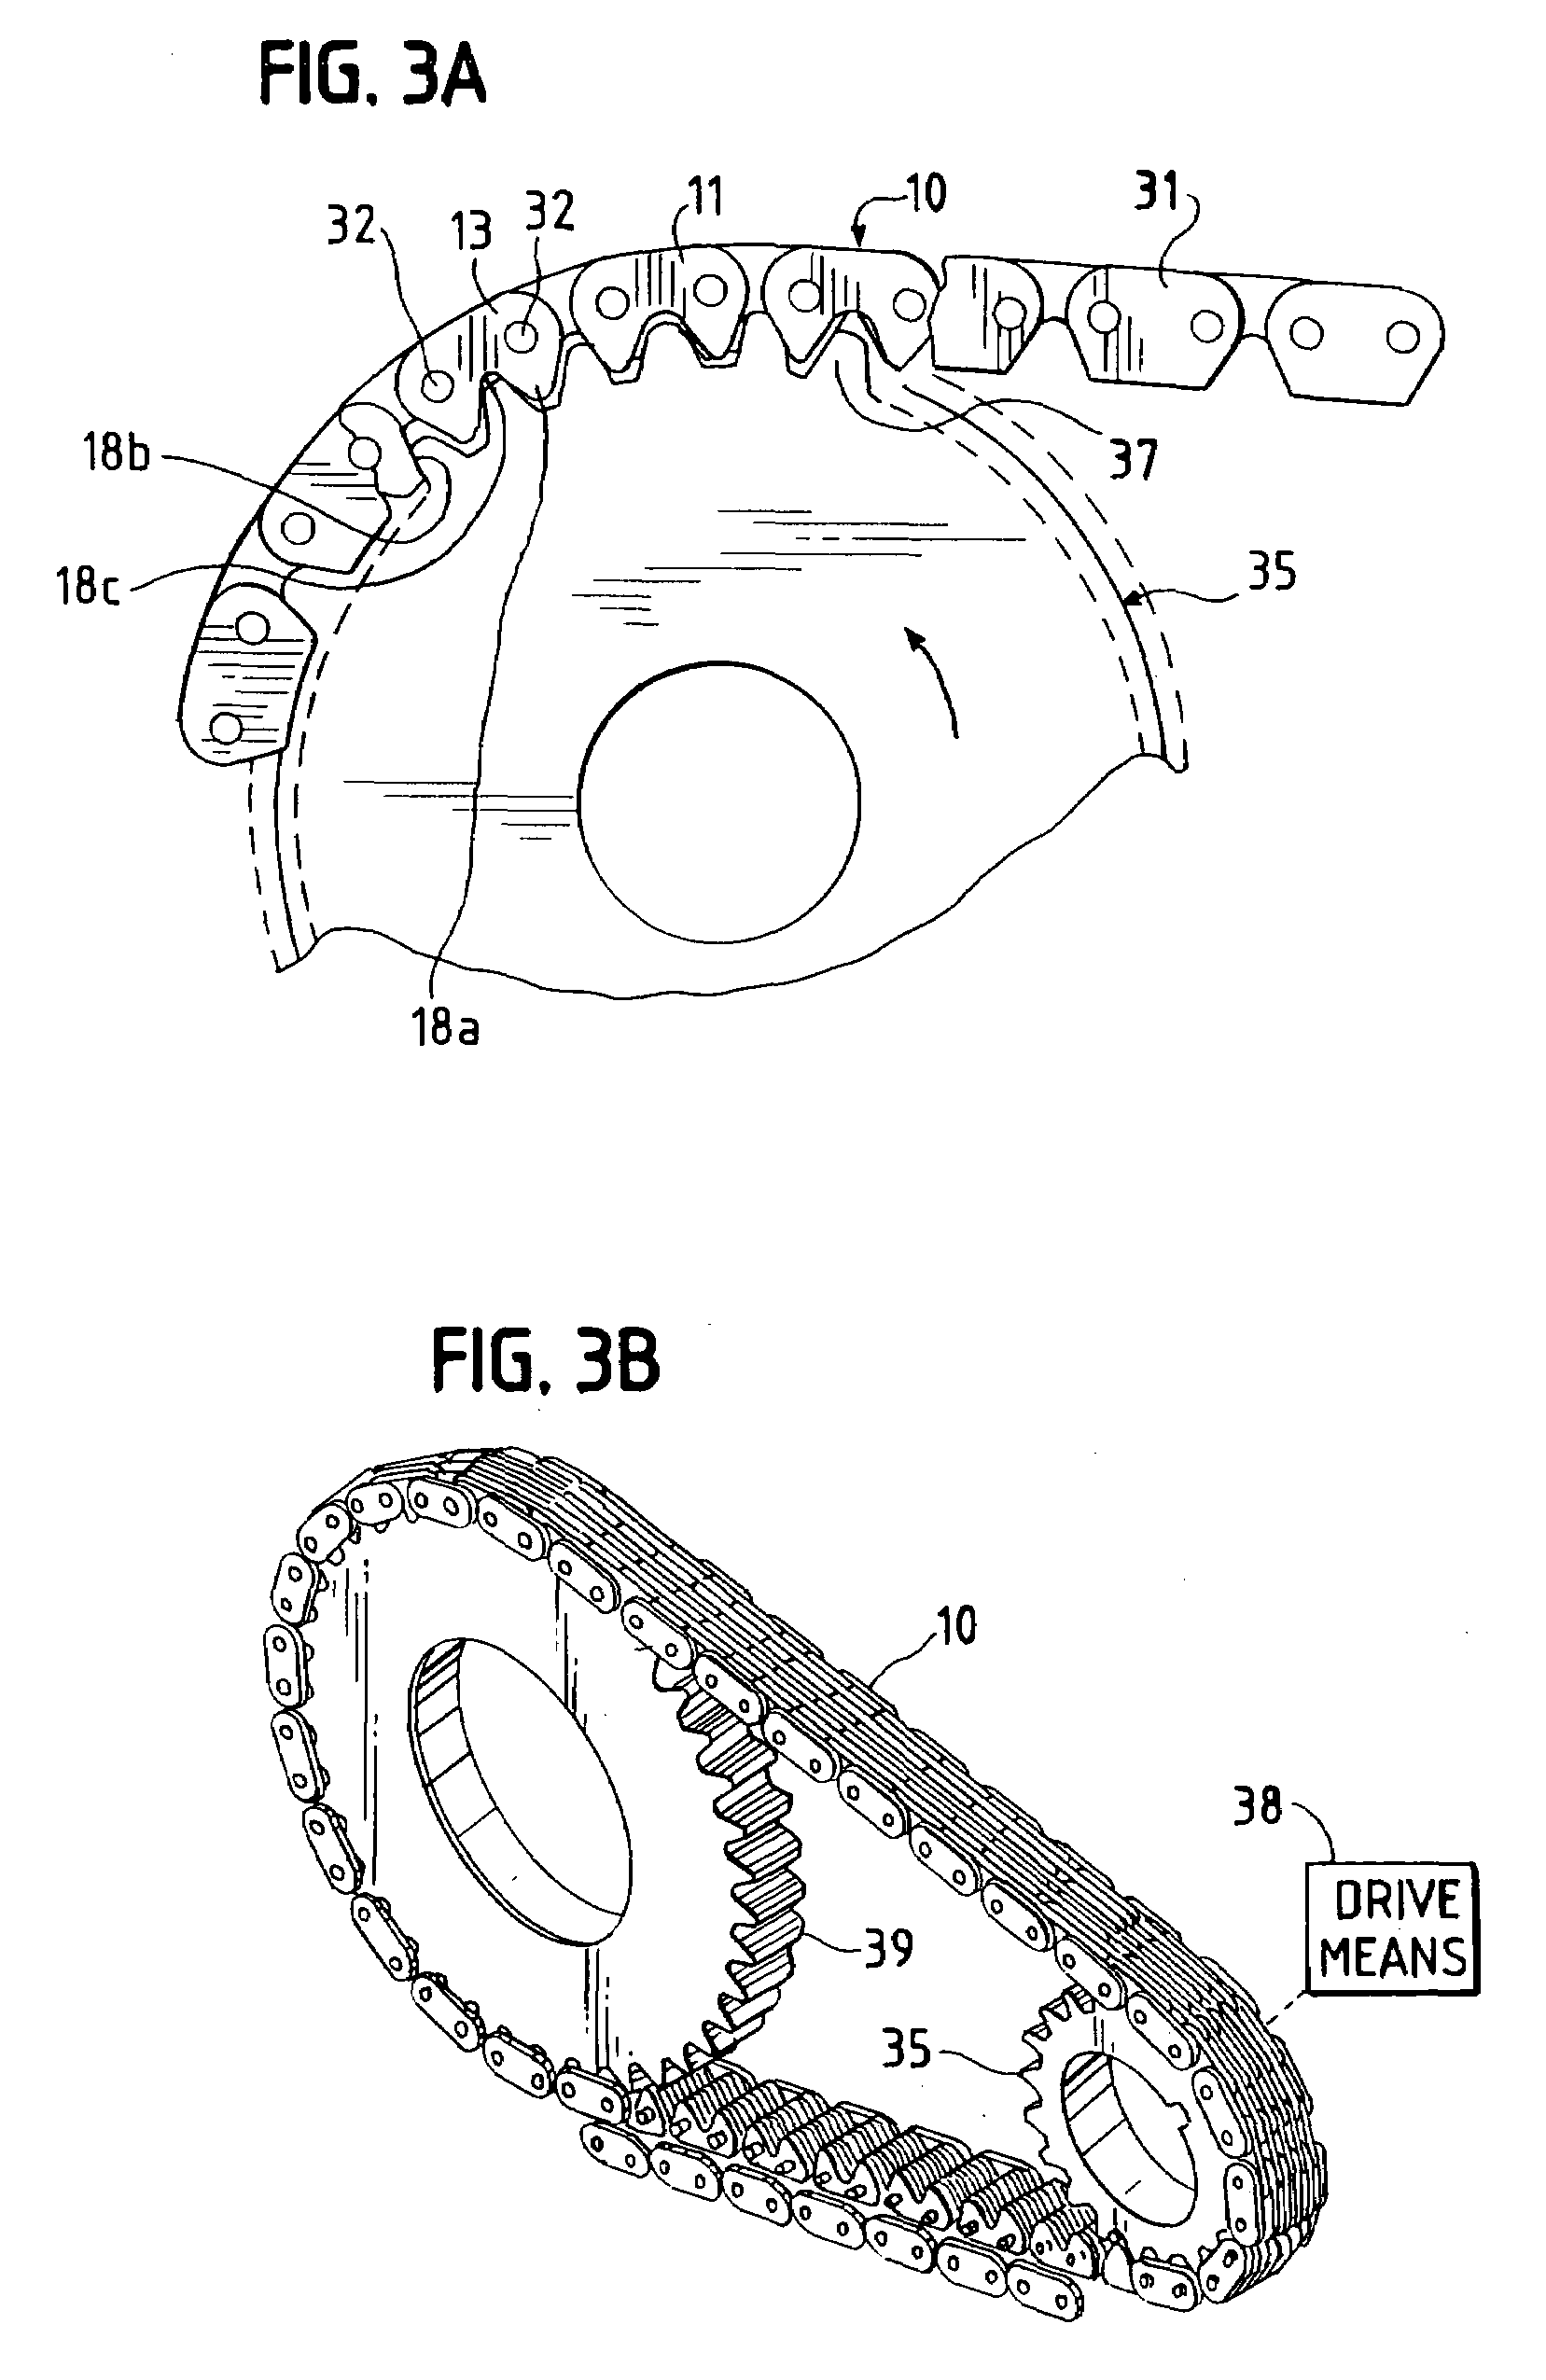 Power transmission chain with ceramic joint components